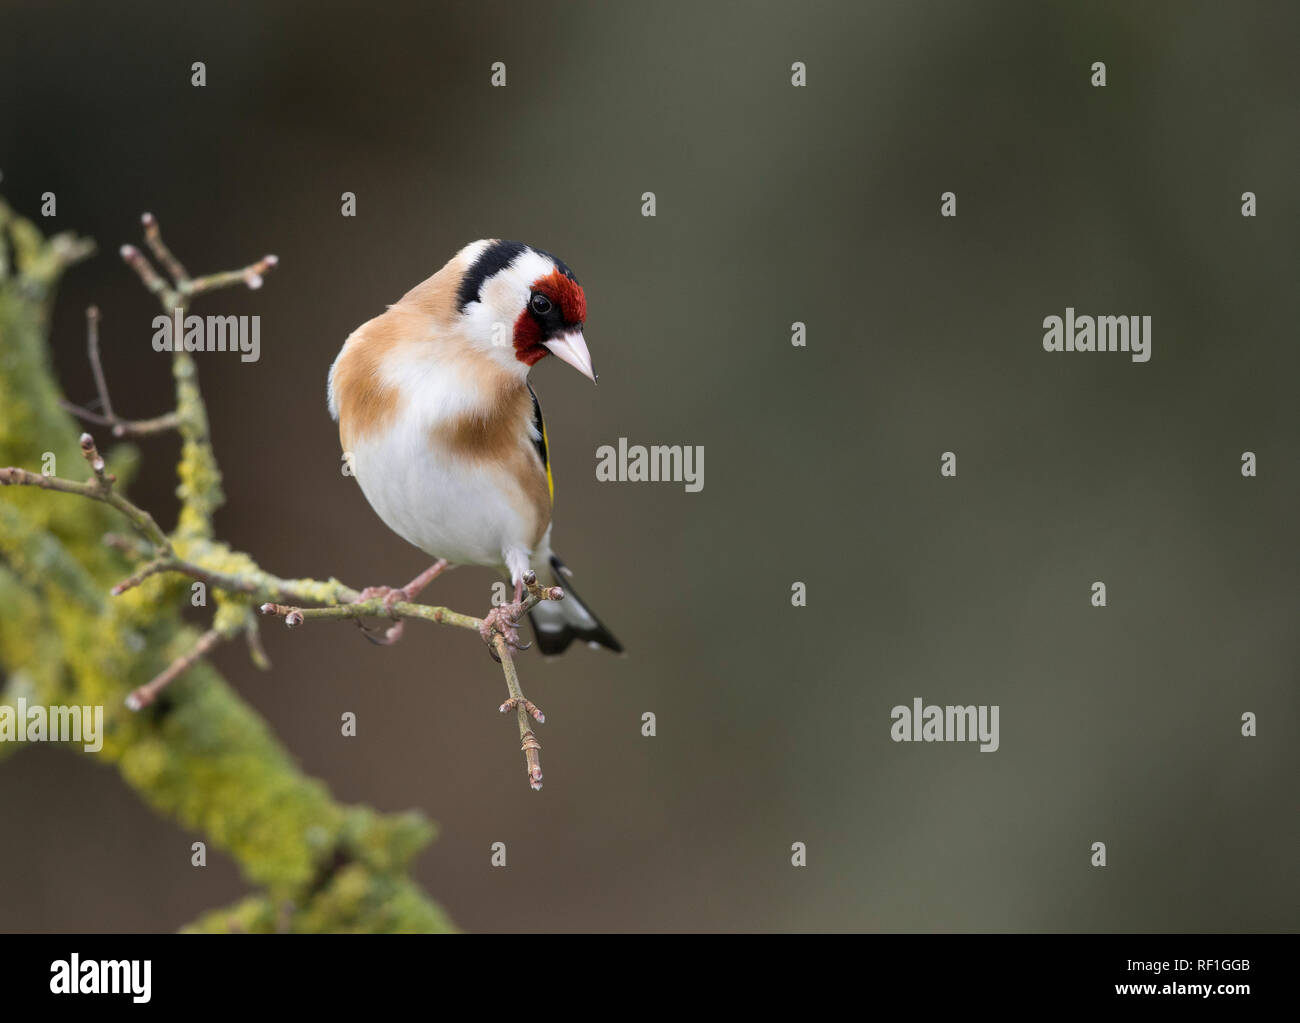 Goldfinch,Carduelis carduelis,on a branch in winter Stock Photo